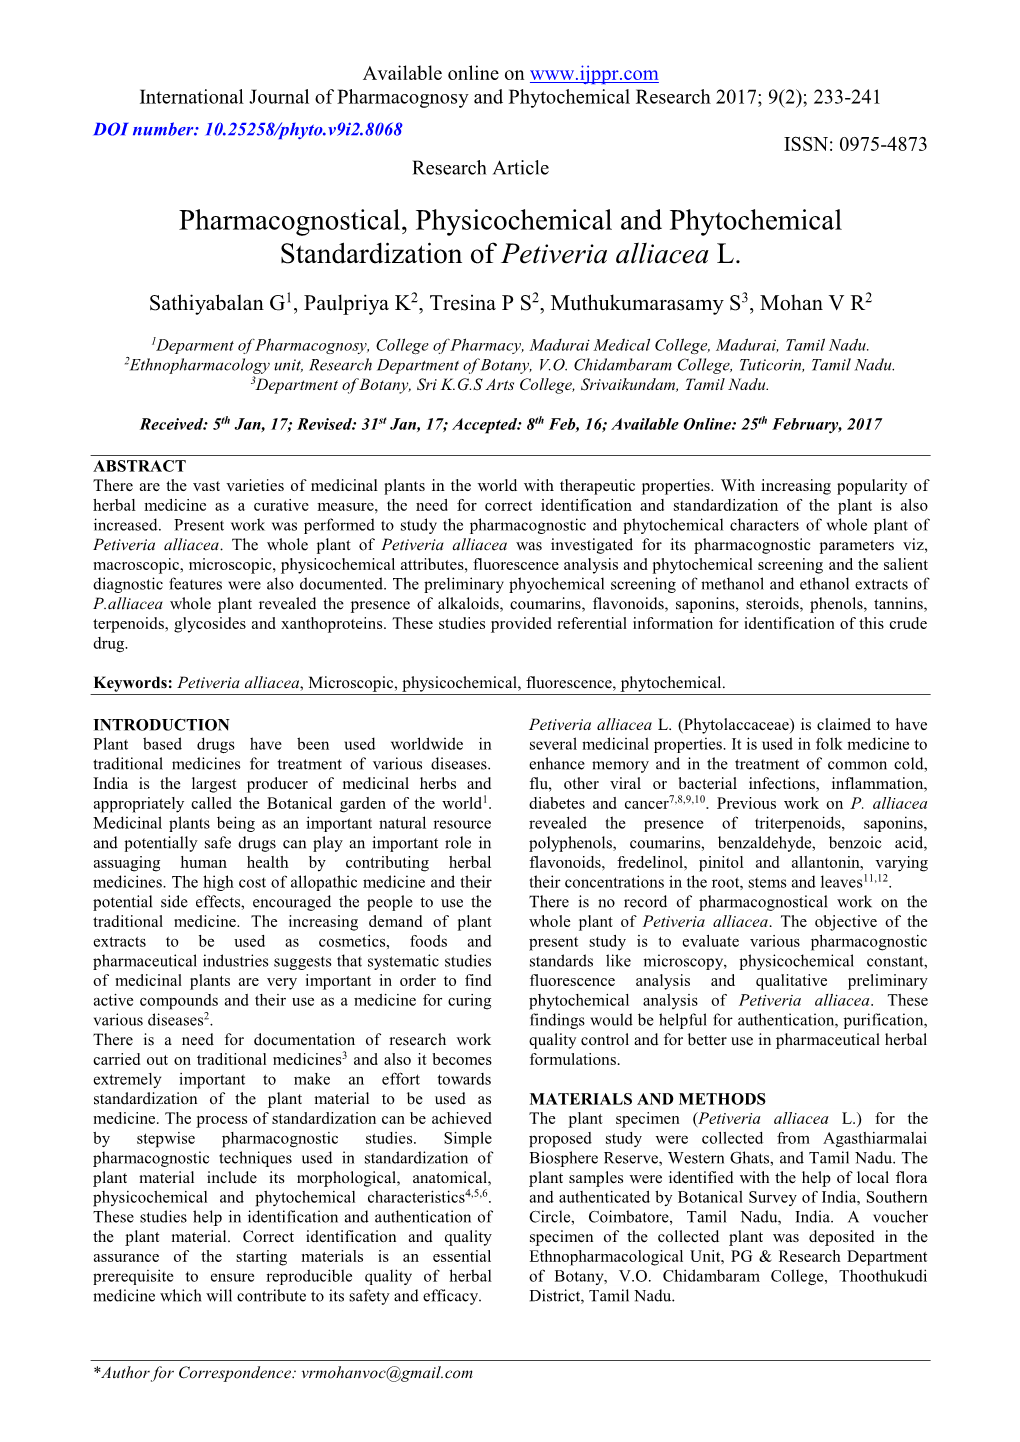 Pharmacognostical, Physicochemical and Phytochemical Standardization of Petiveria Alliacea L